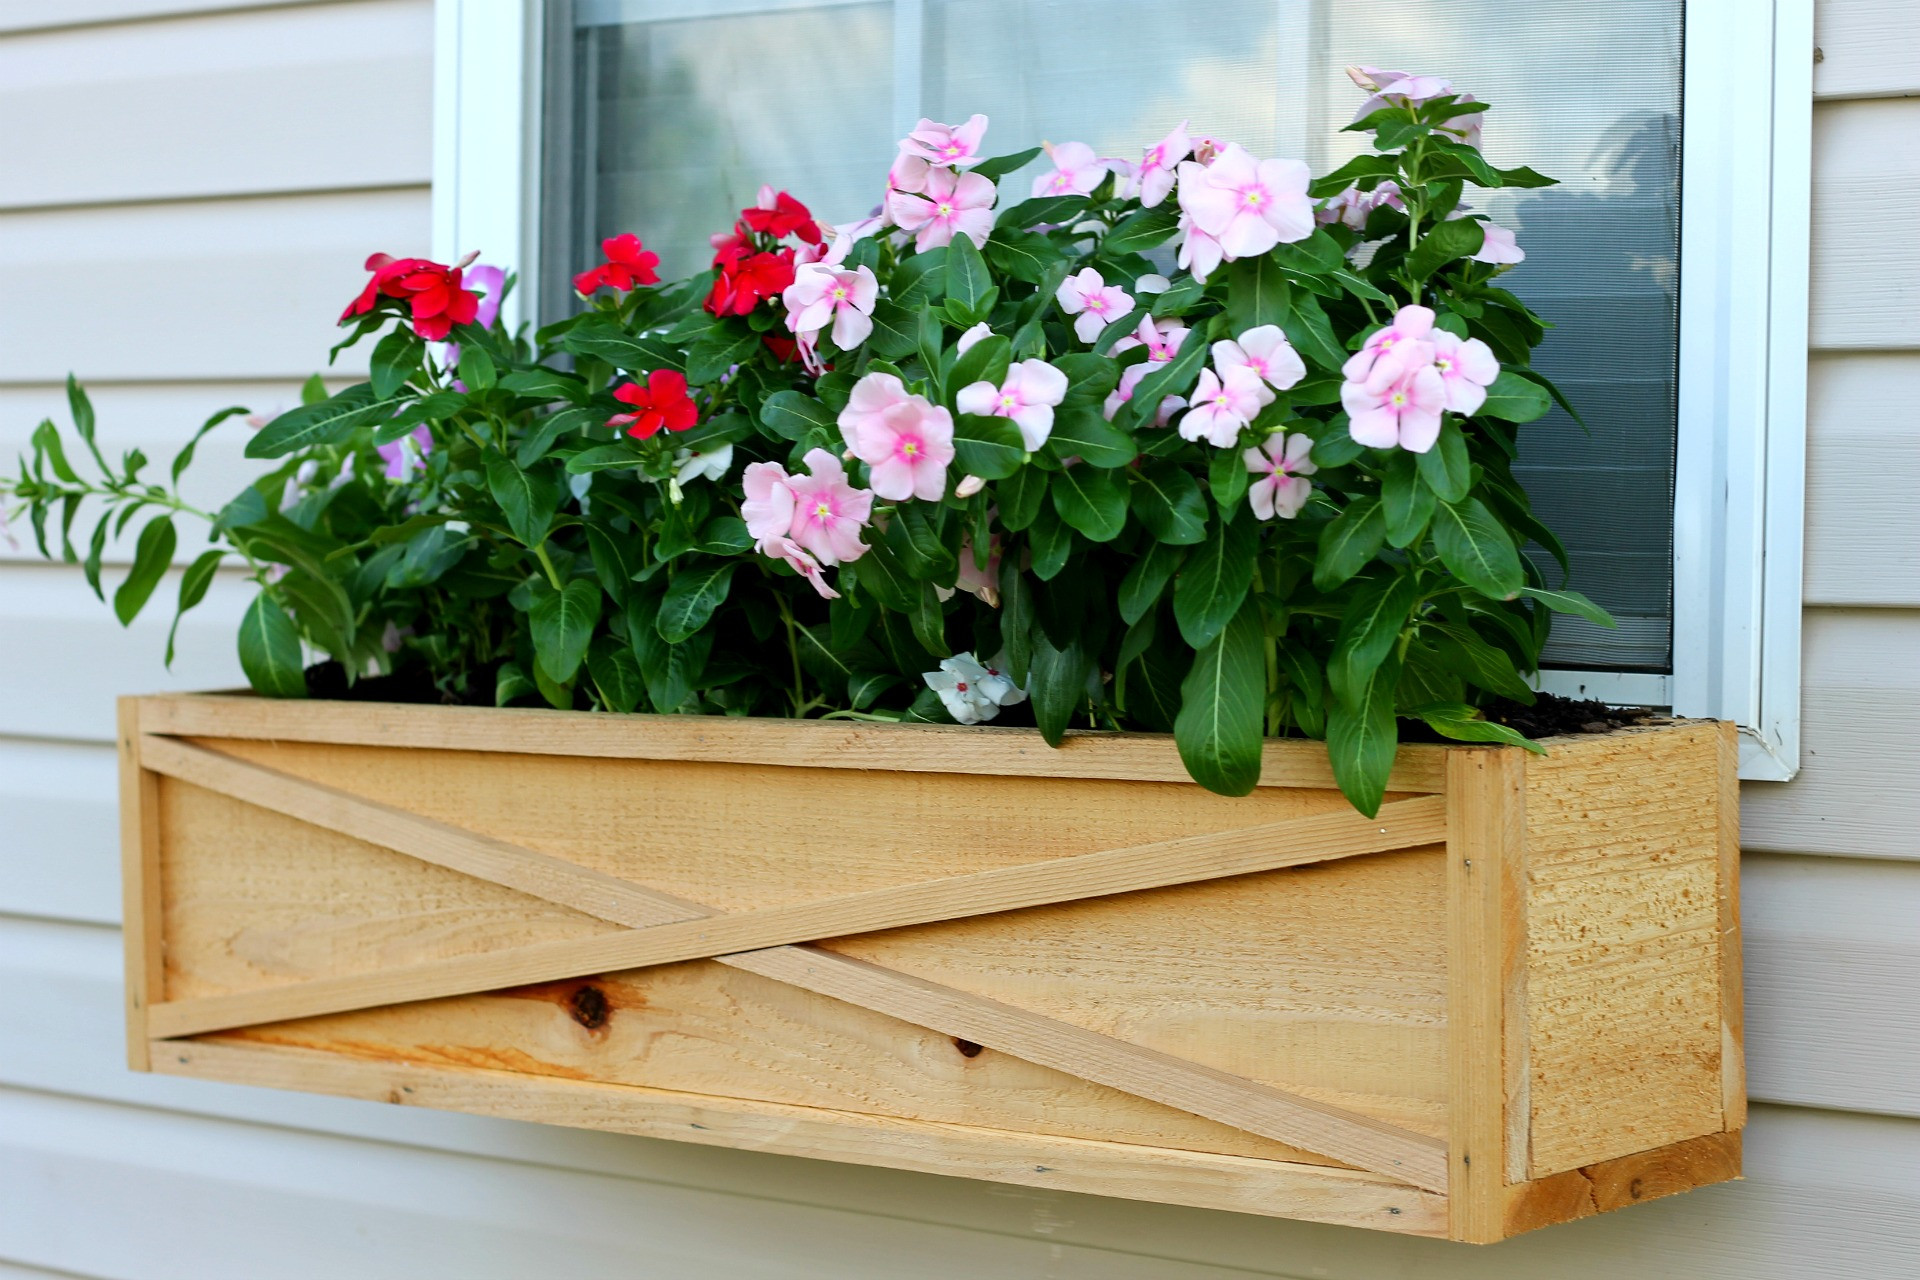 DIY Window Planter Boxes
 23 DIY Window Box Ideas Build And Fill Them With Colorful